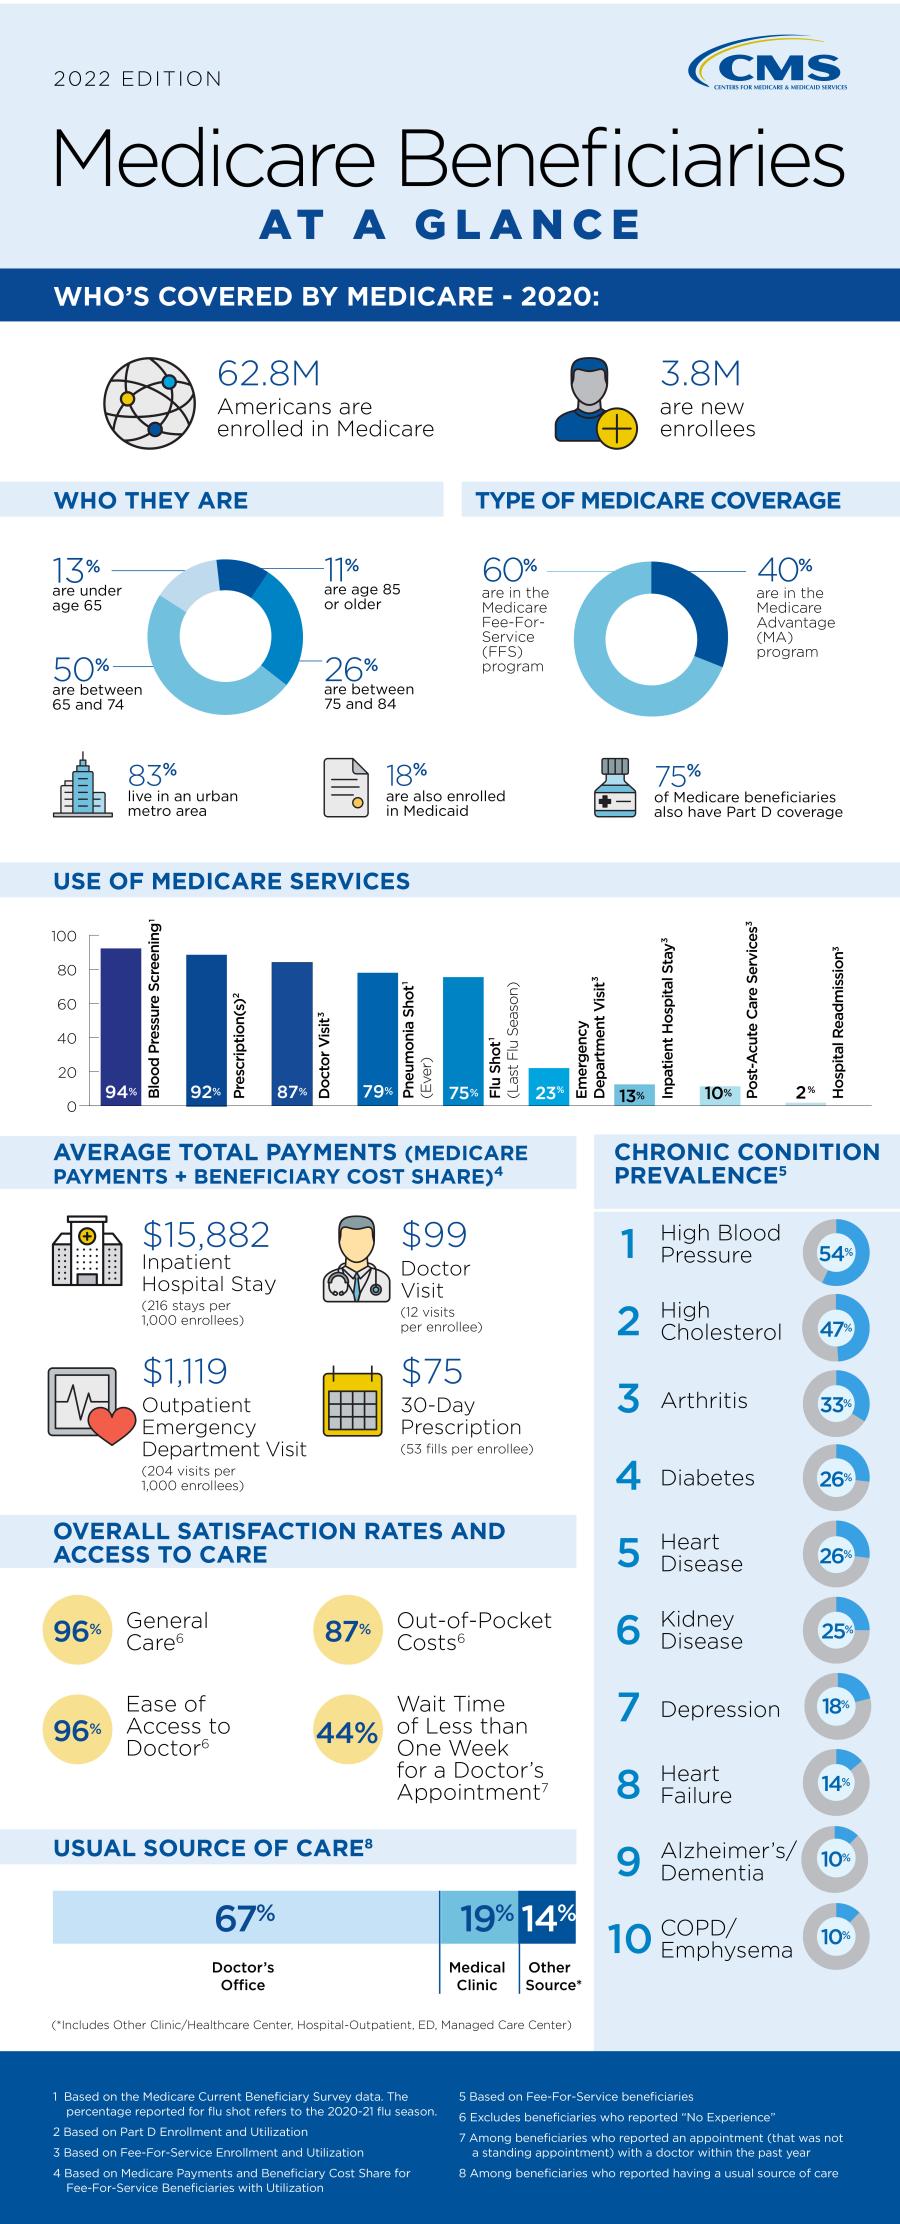 Centers for Medicare & Medicaid Services Data